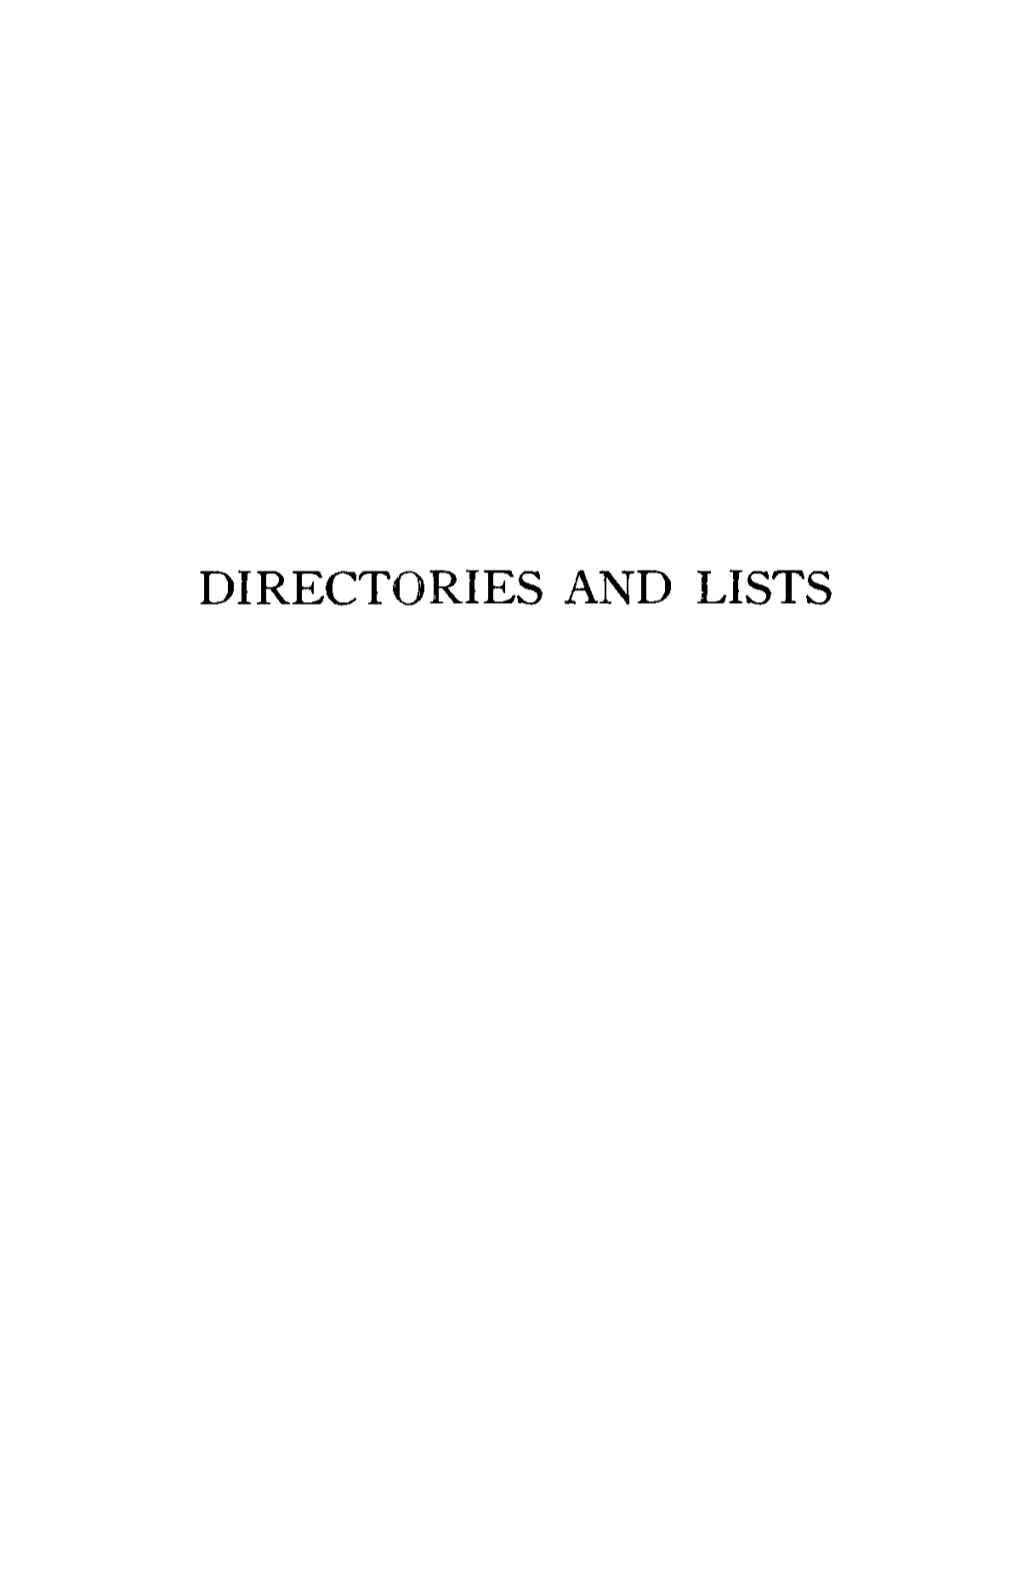 Directories and Lists Jewish National Organizations in the United States